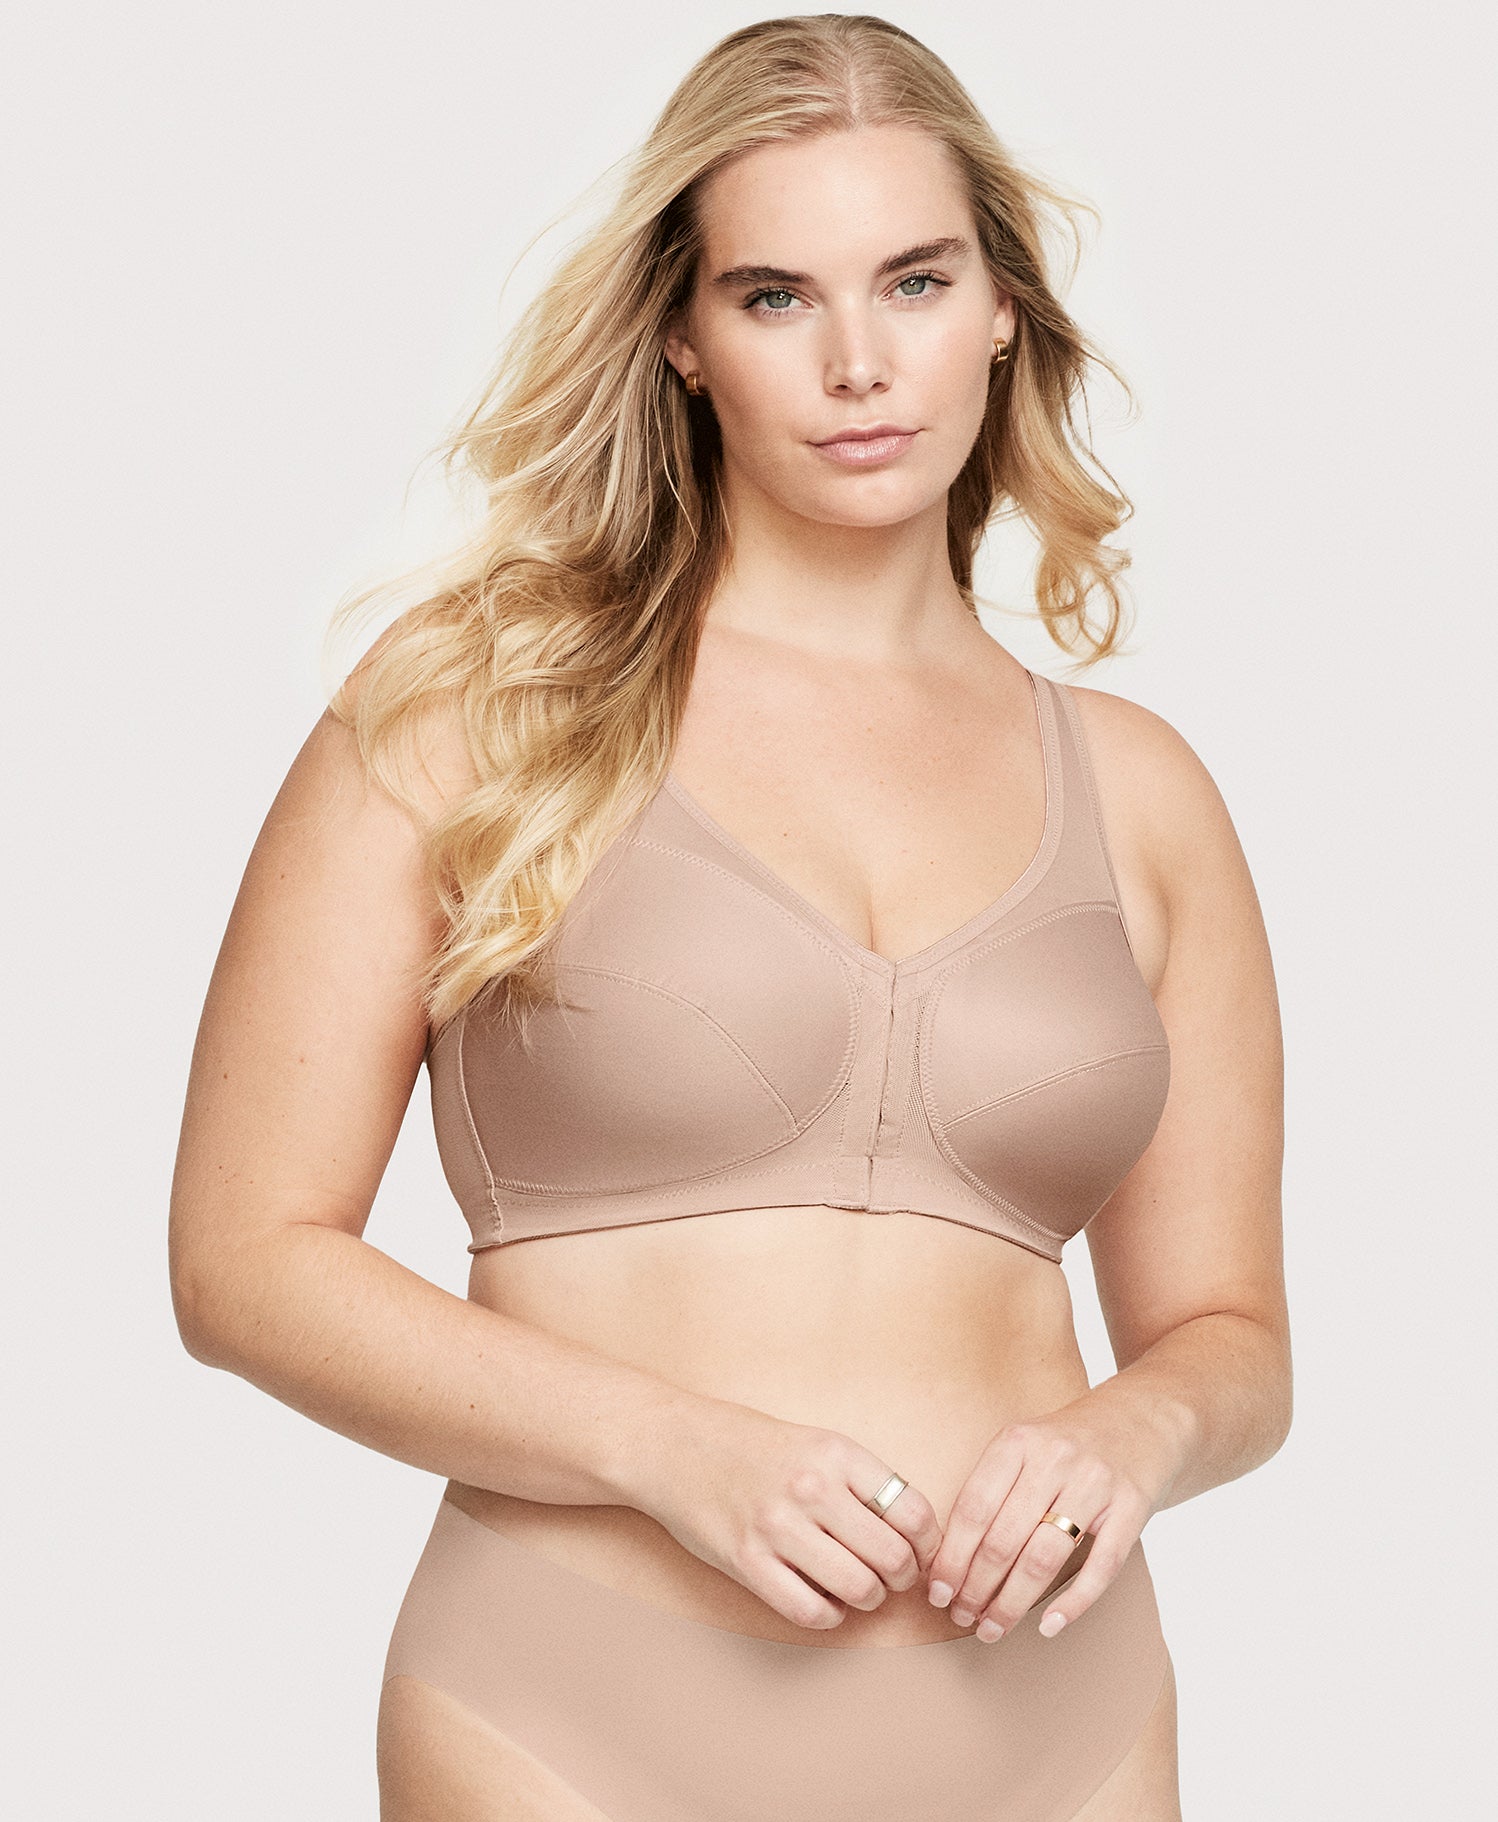 Glamorise Bras and Full Cup Bras - Now 40% Off